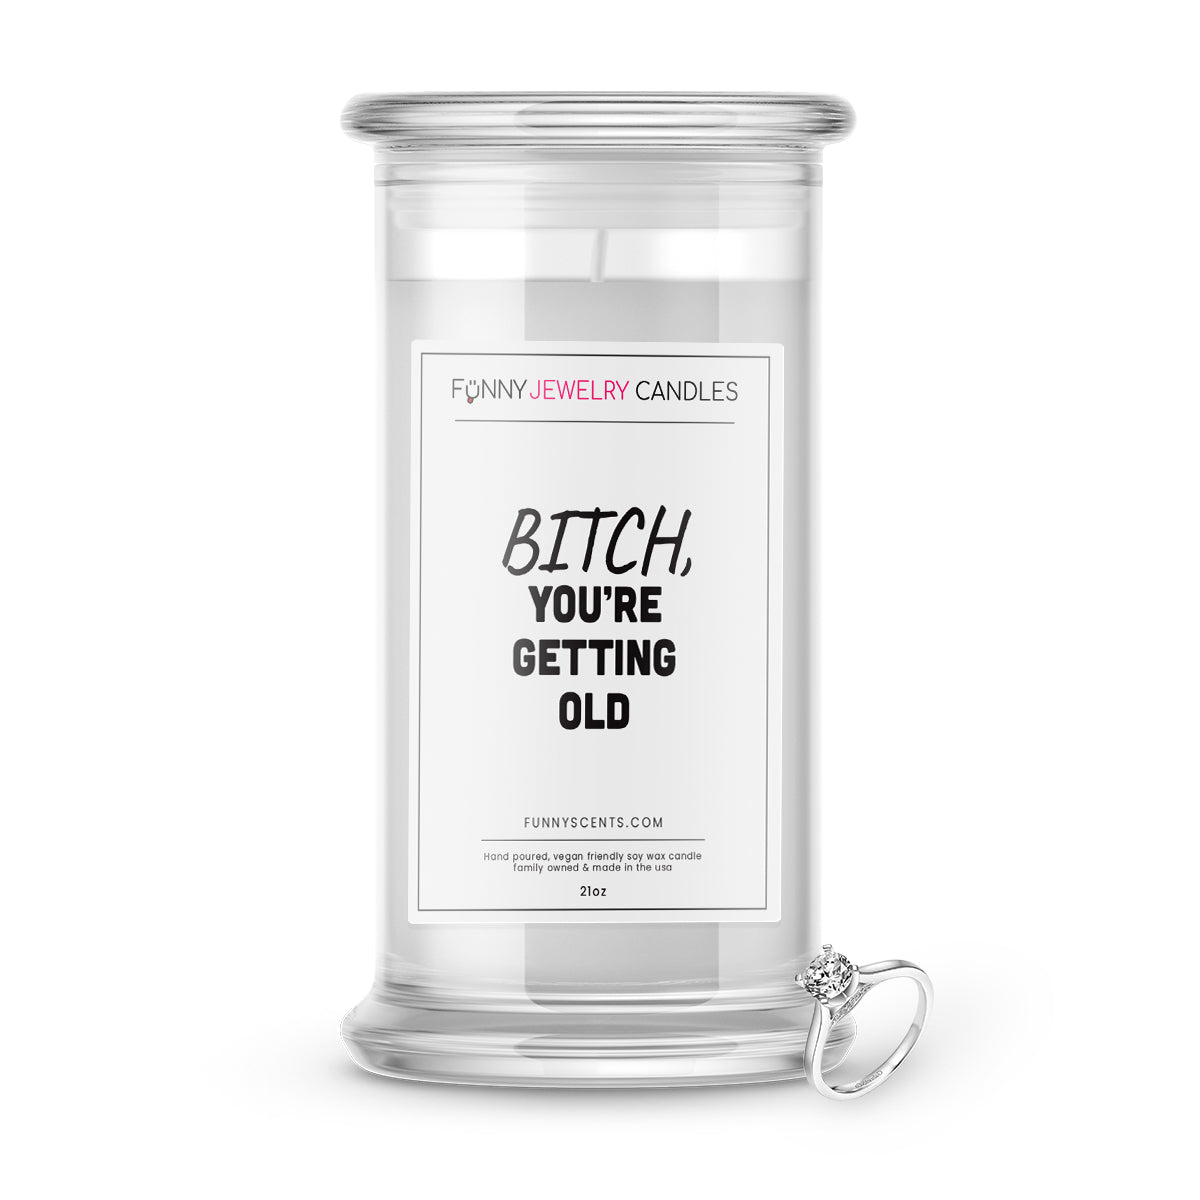 Bitch, You're Getting Old Jewelry Funny Candles